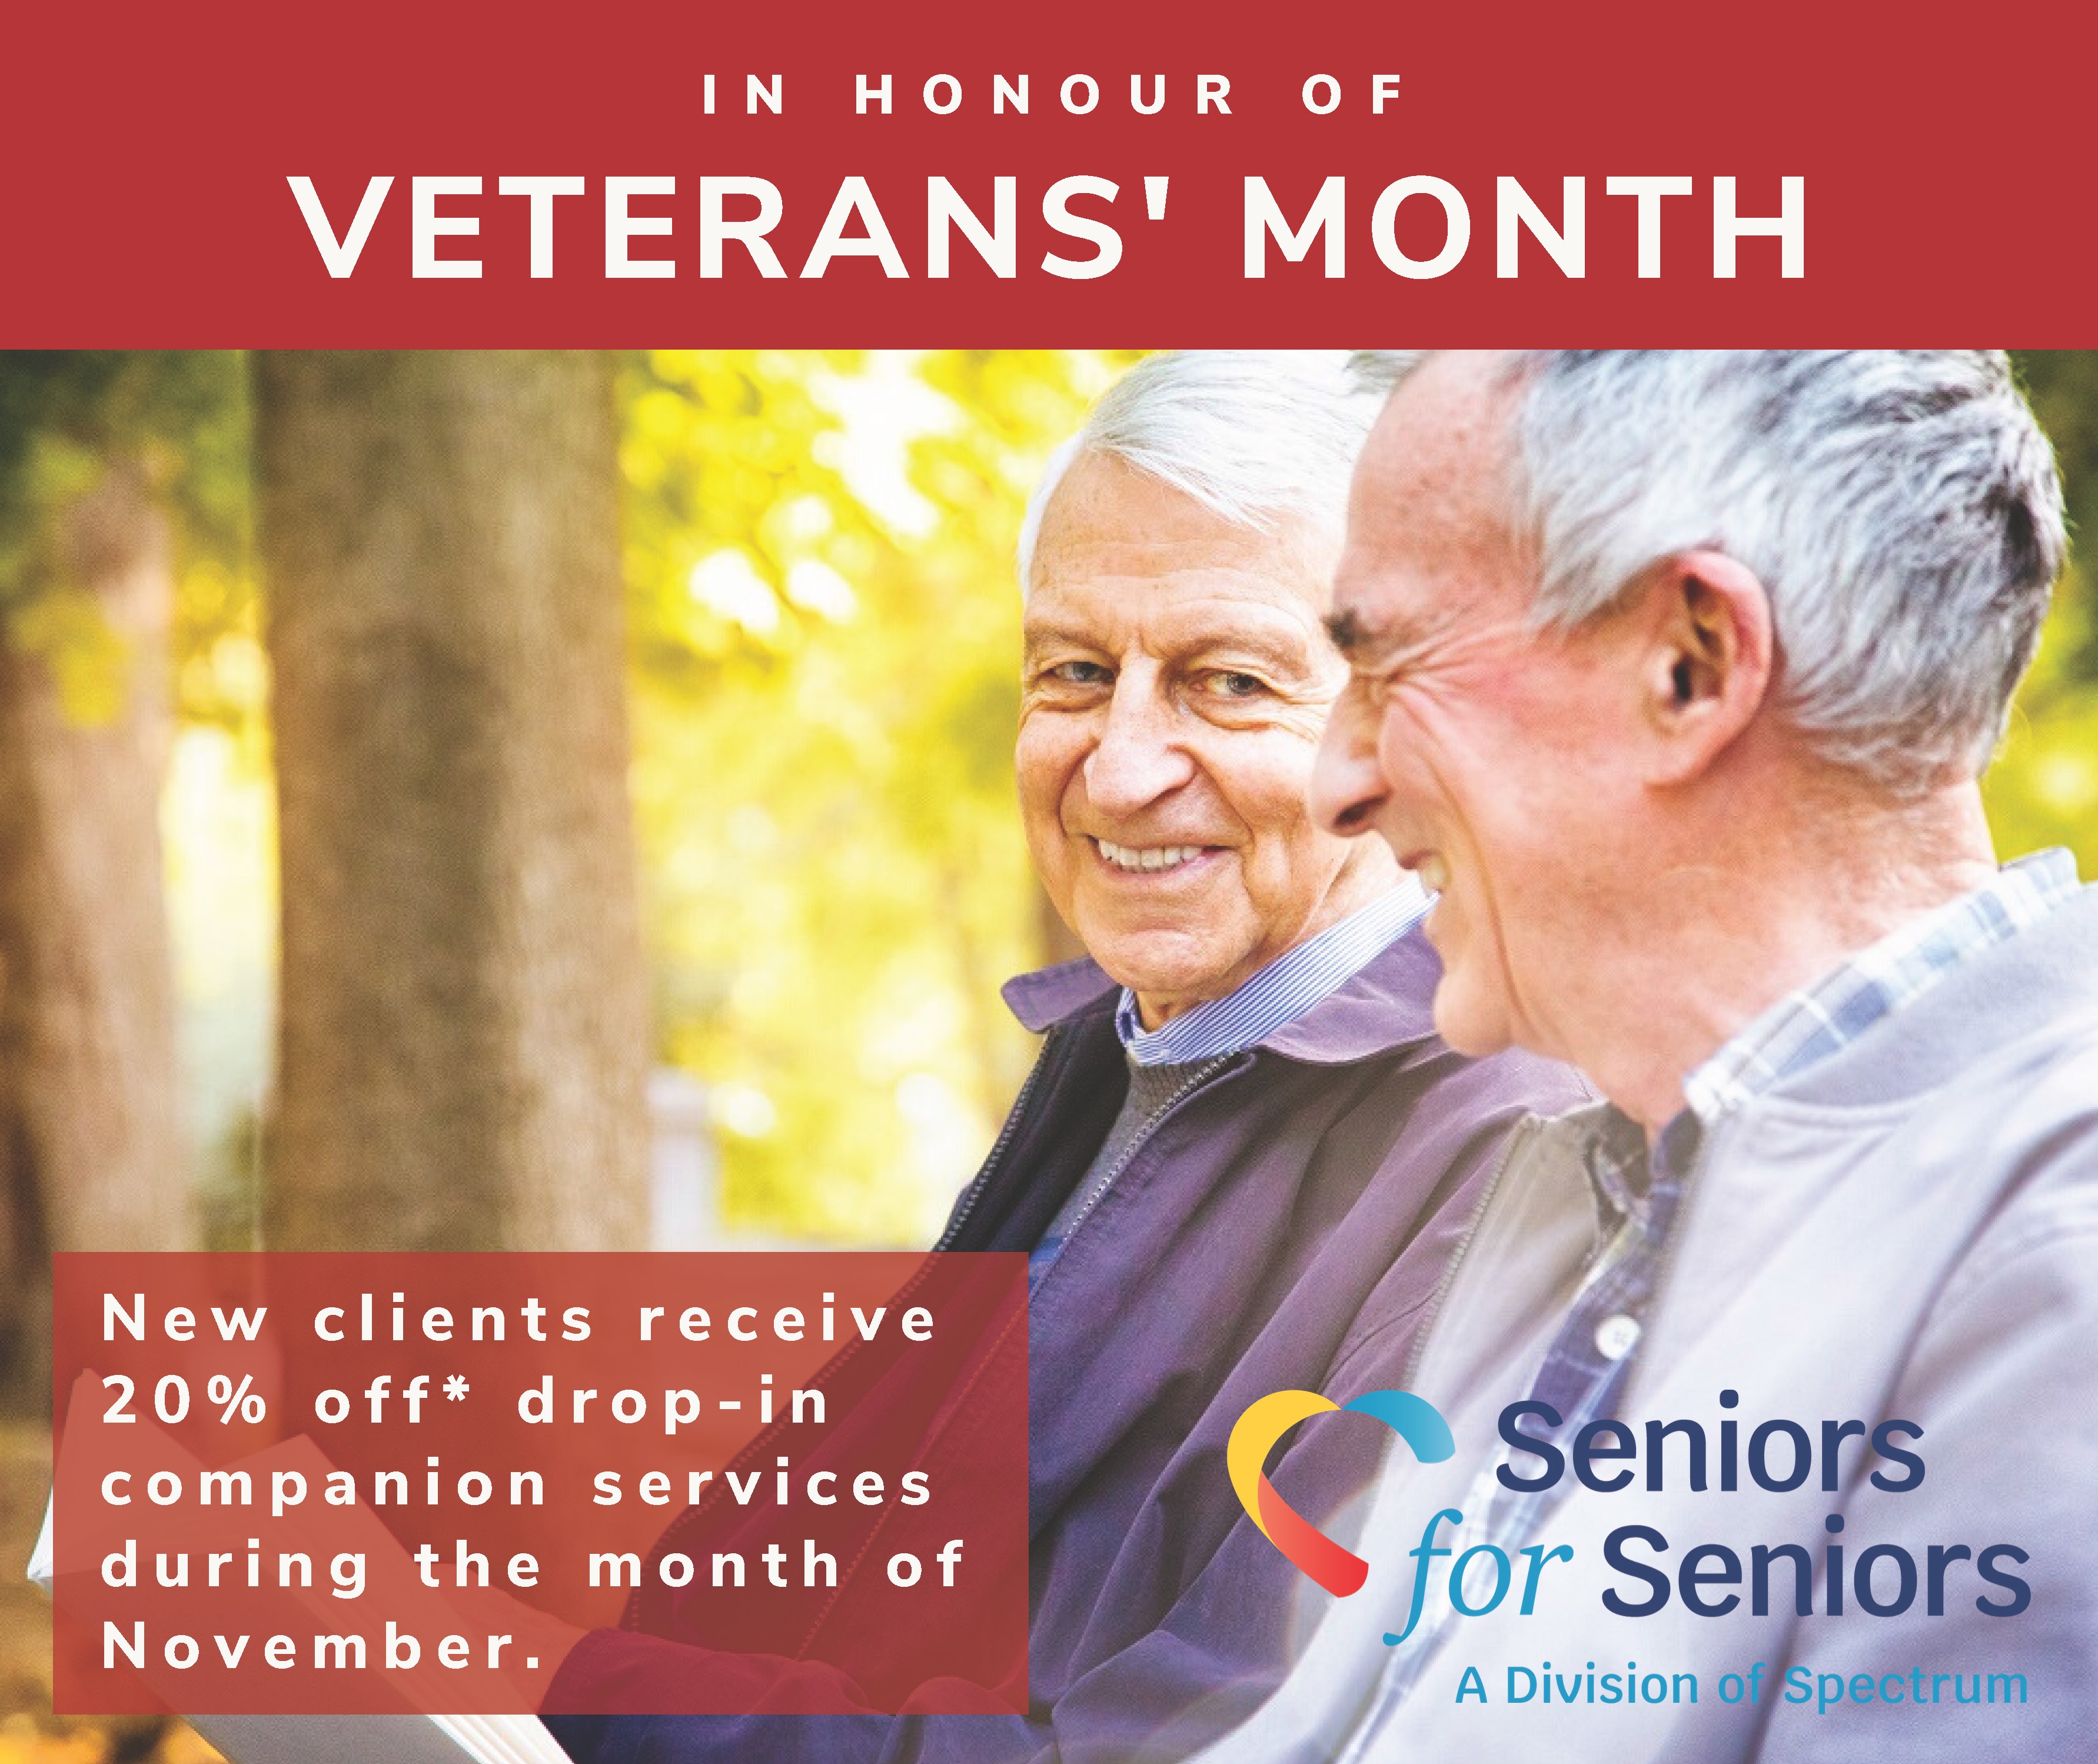 Image: A special Veterans' Month discount